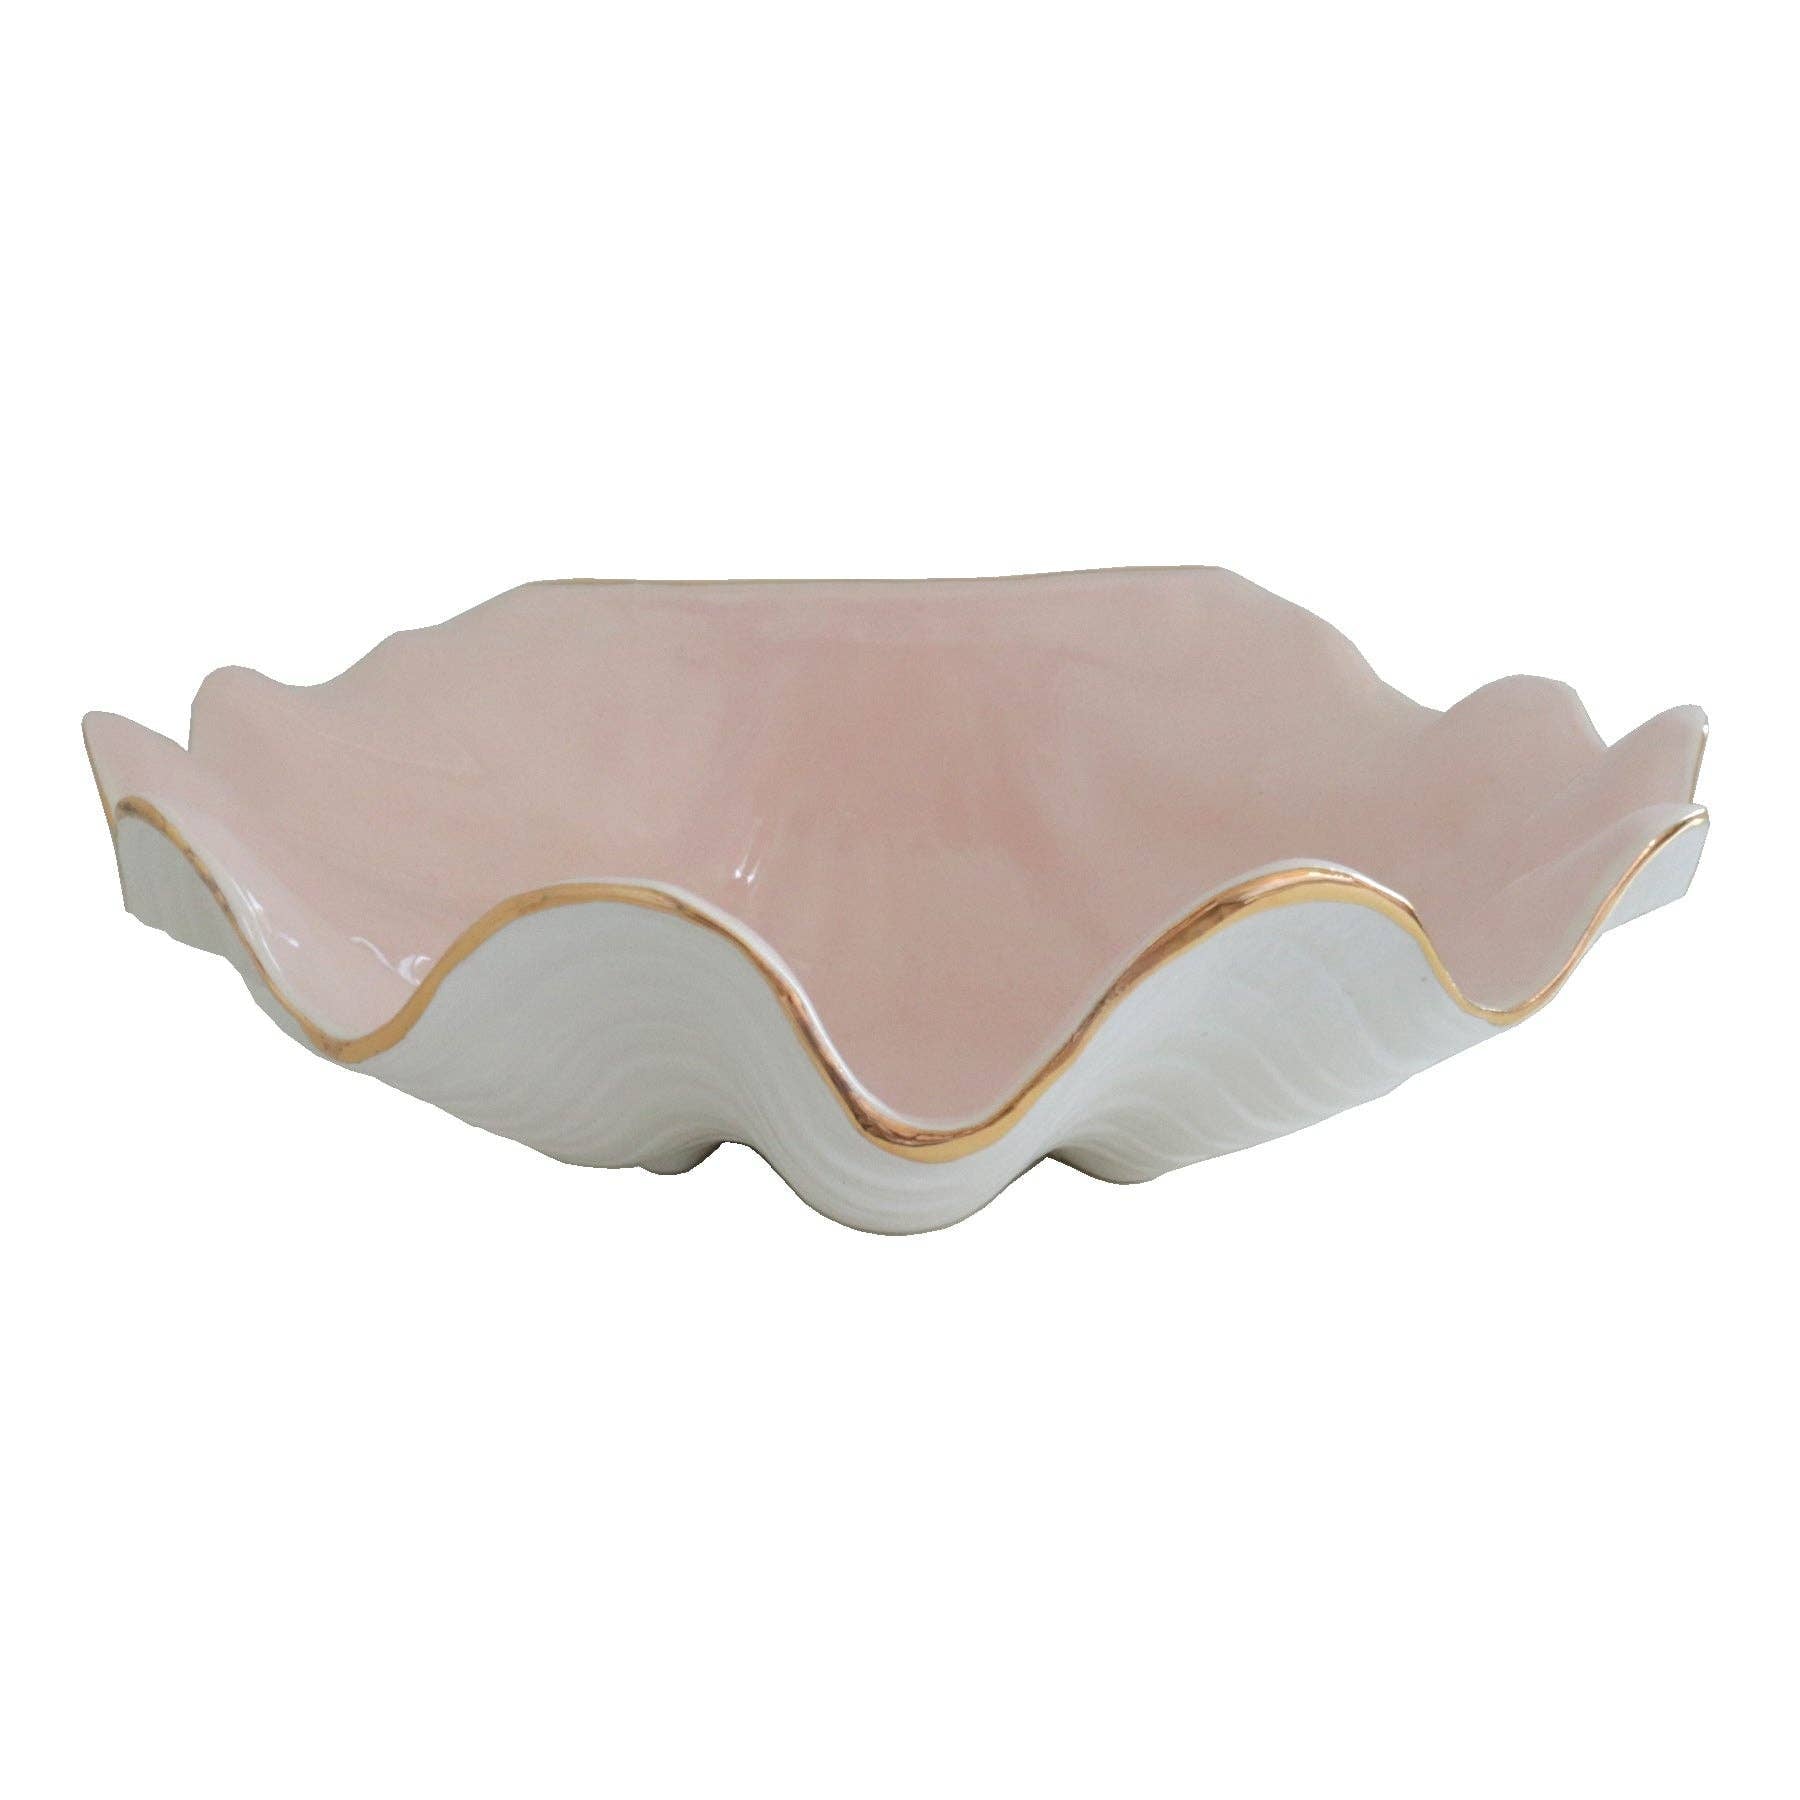 Lo Home by Lauren Haskell Designs Clam Shell Bowl with 22K Gold Accent: Small / Pink - Little Birdies